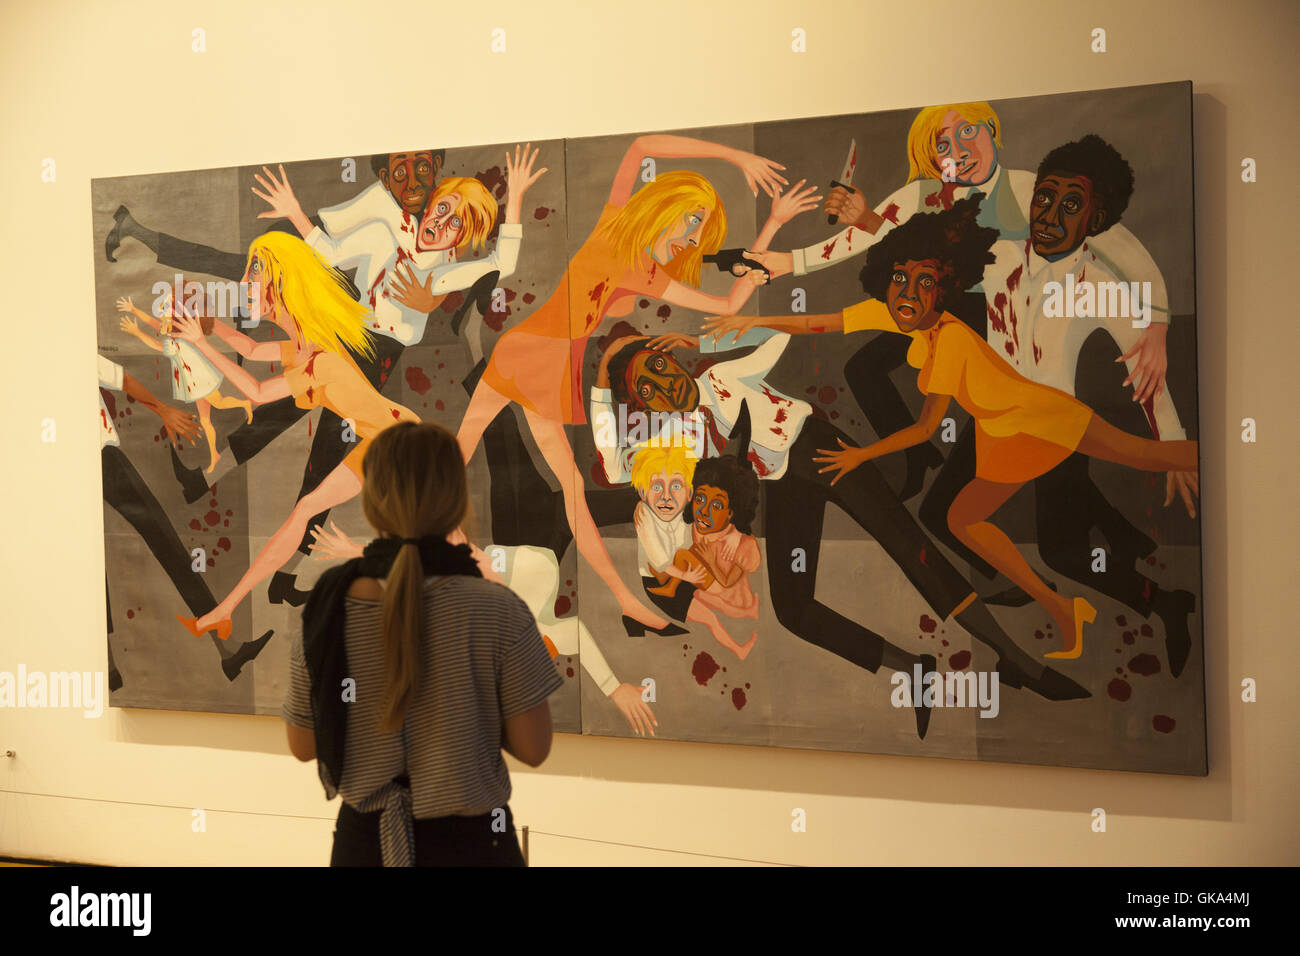 American People Series #20: Die, 1967. Oil on canvas, by Faith Ringgold, b. 1930. (Evokes US race riots from the 1960's) MoMA Stock Photo